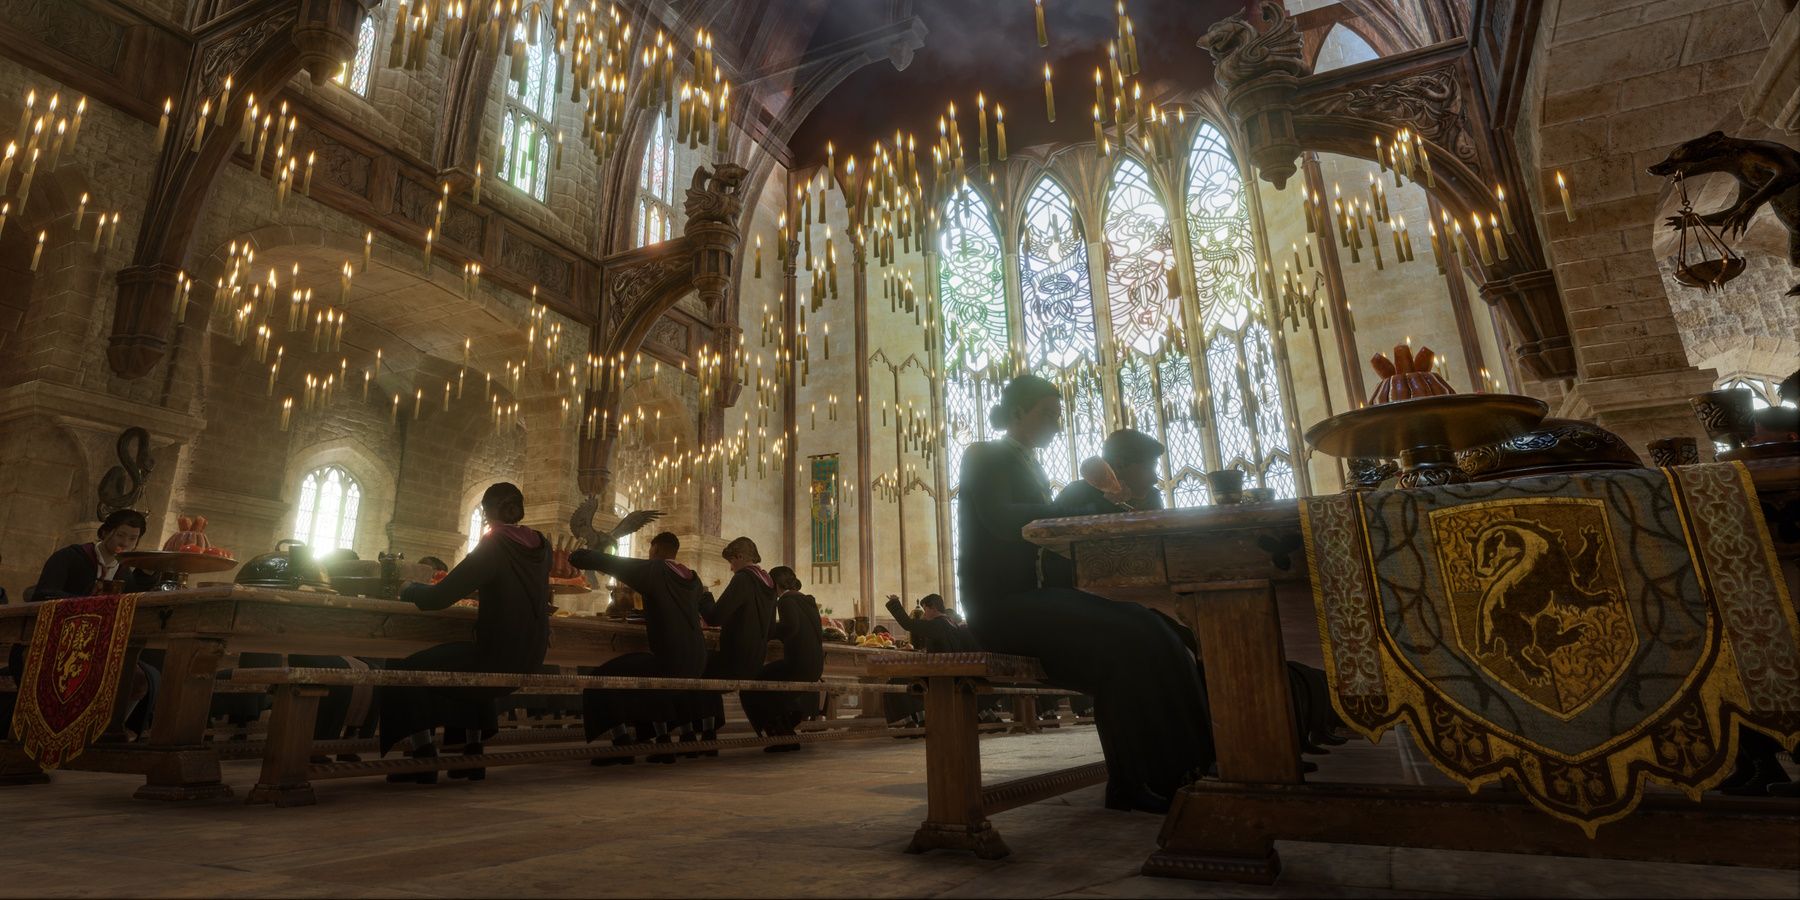 Image of the hogwarts legacy dining hall with students eating at the tables and candles floating above